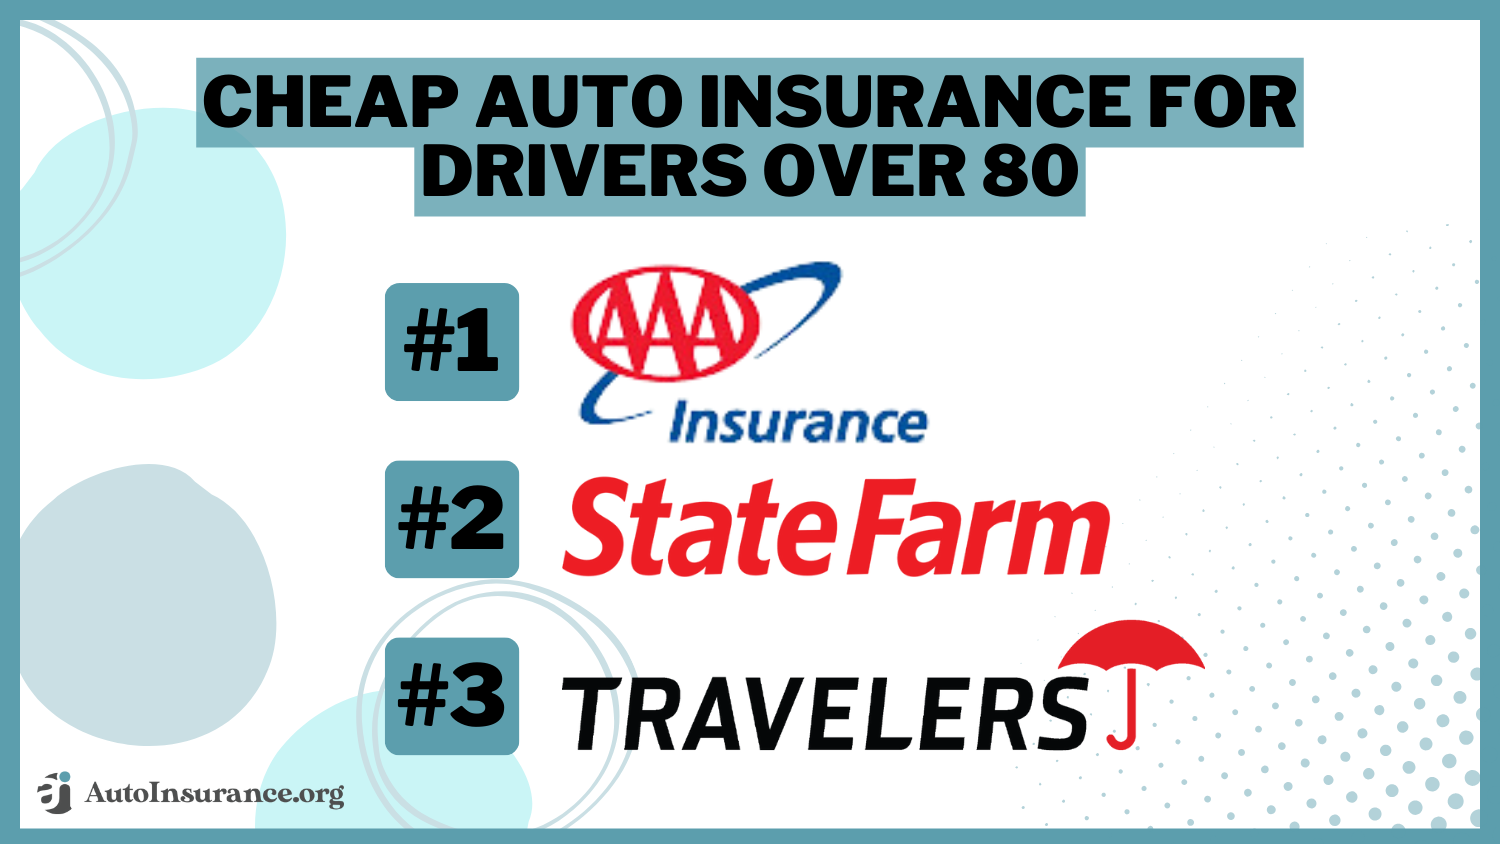 Cheap Auto Insurance for Drivers Over 80: AAA, State Farm, Travelers